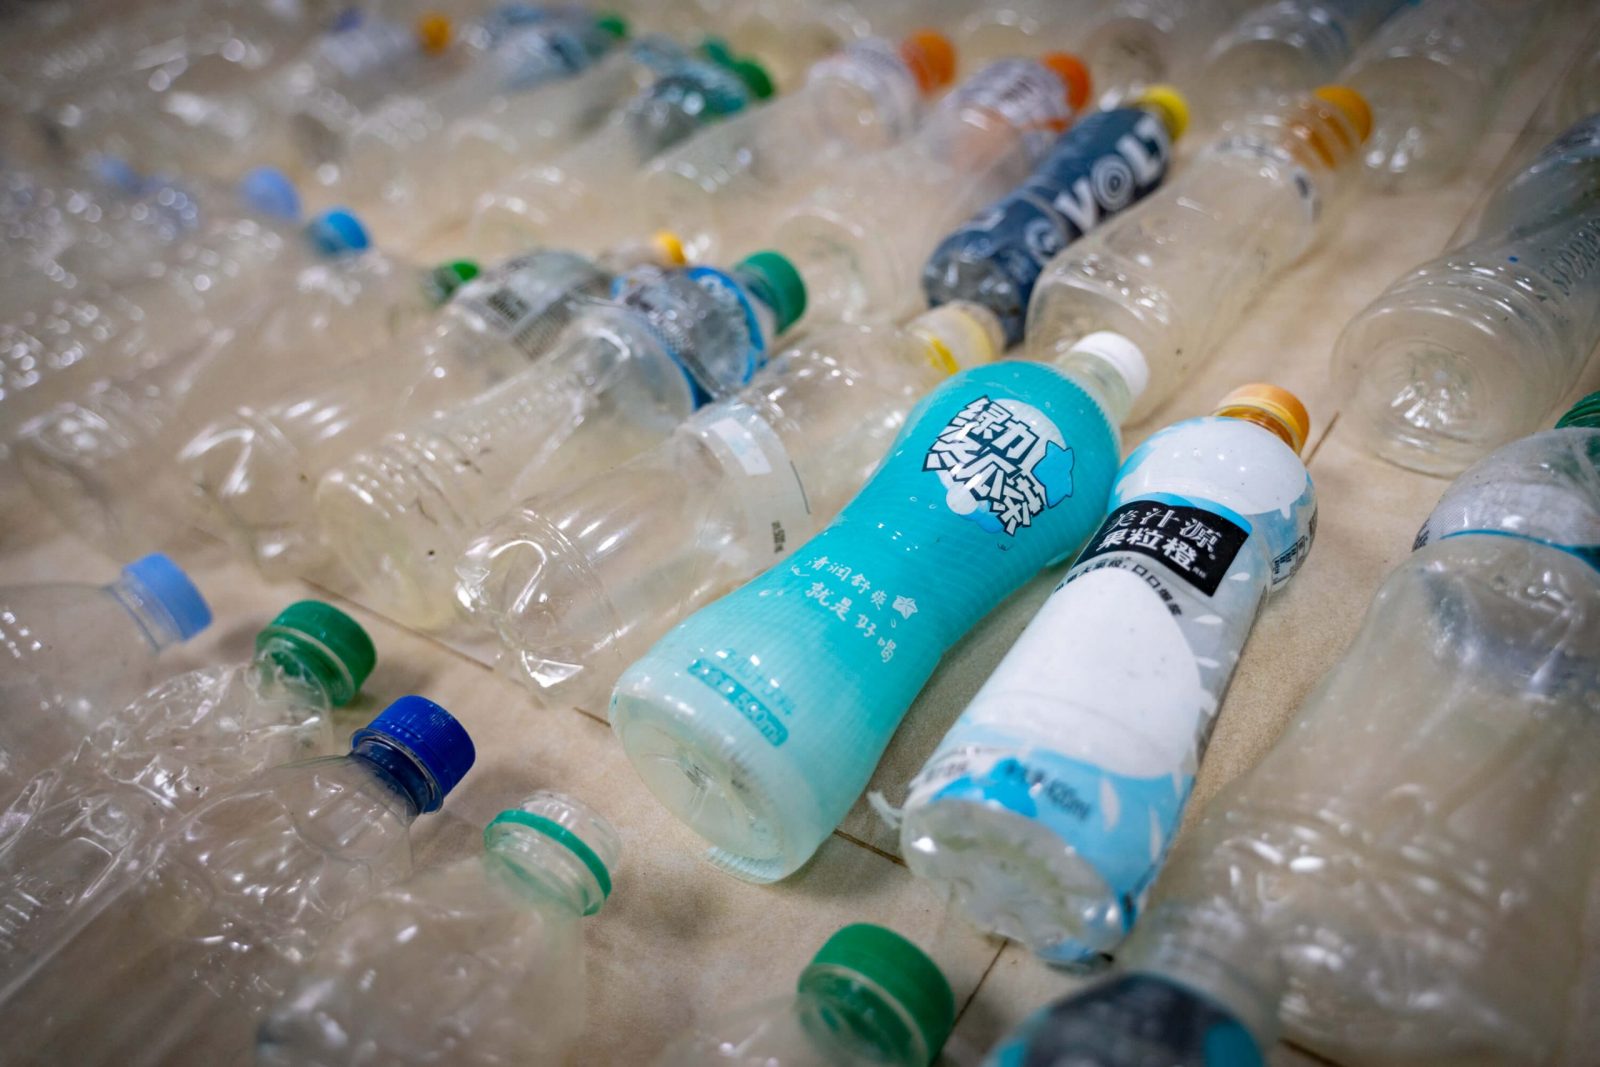 Rows of plastic bottles laid on the ground of varying shapes, sizes, and colors.